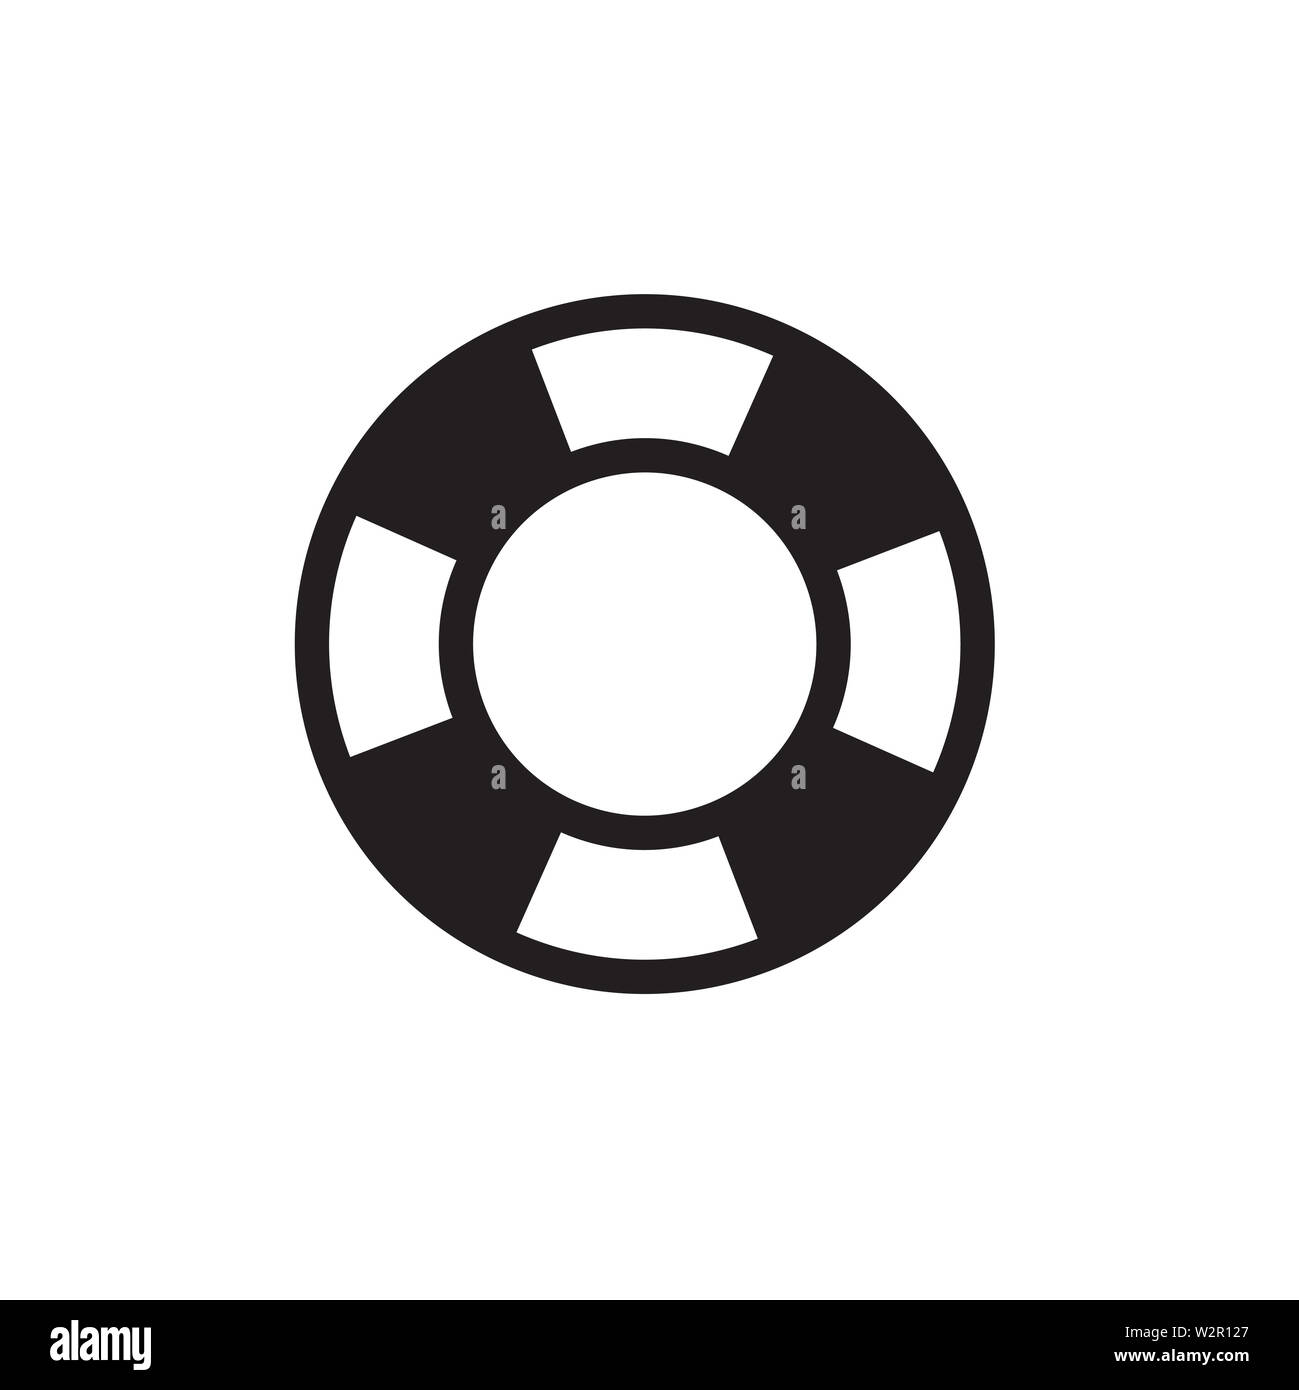 Lifebuoy Icon In Flat Style Vector For App, UI, Websites. Black Icon ...